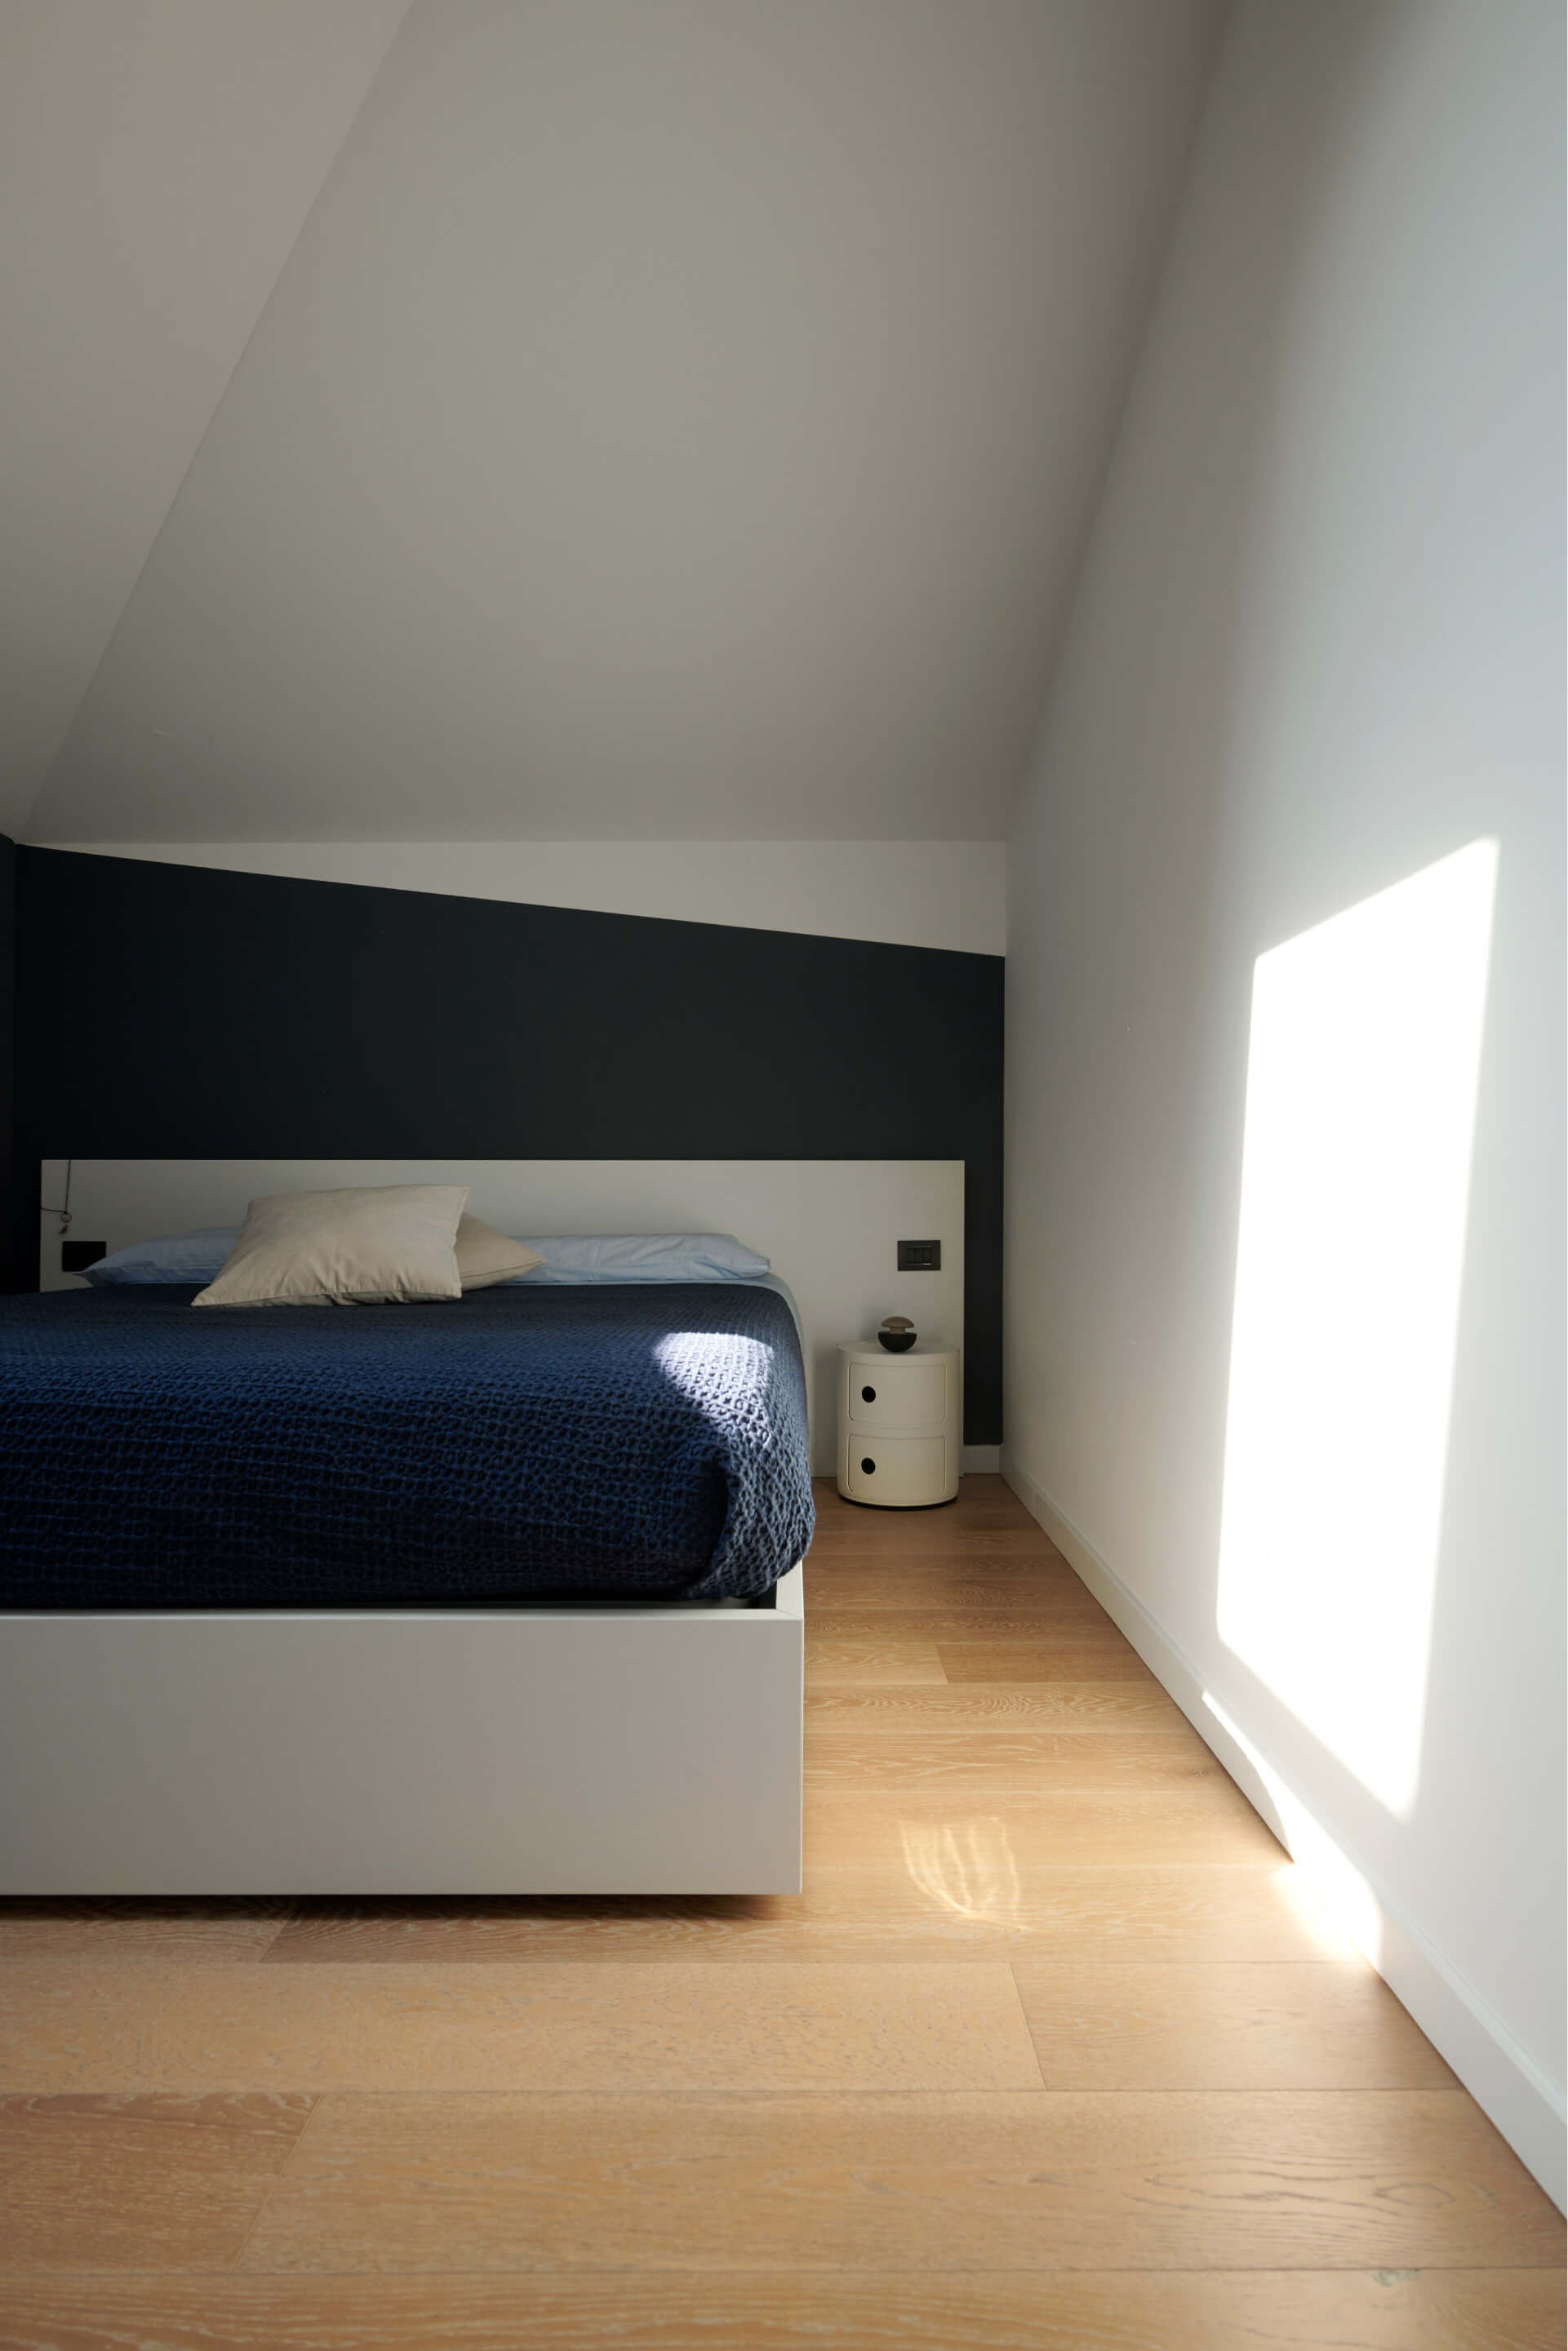 A bedroom area with bed and white walls